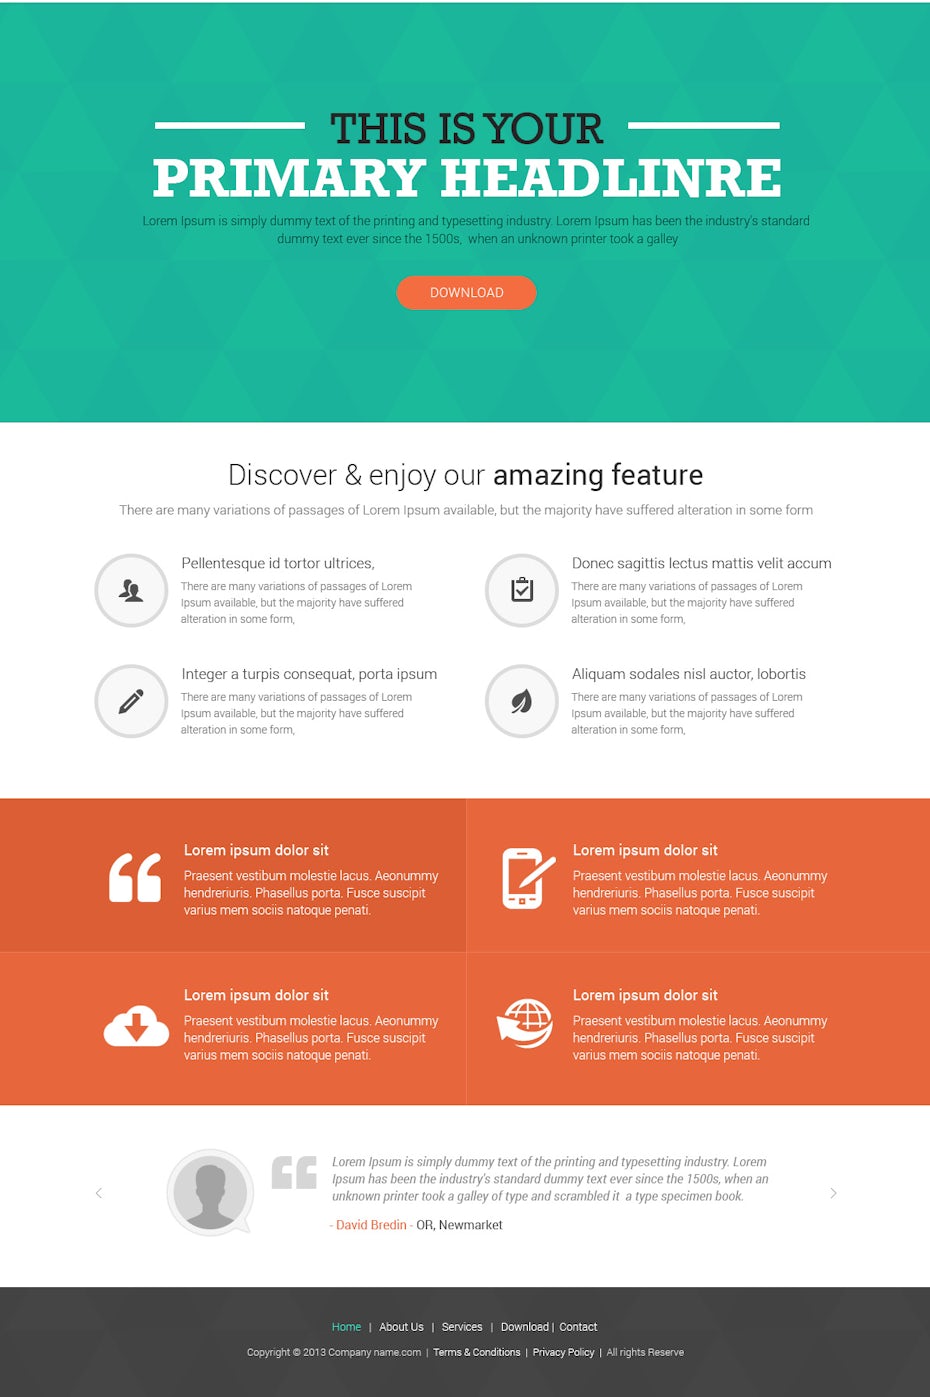 99designs template landing page